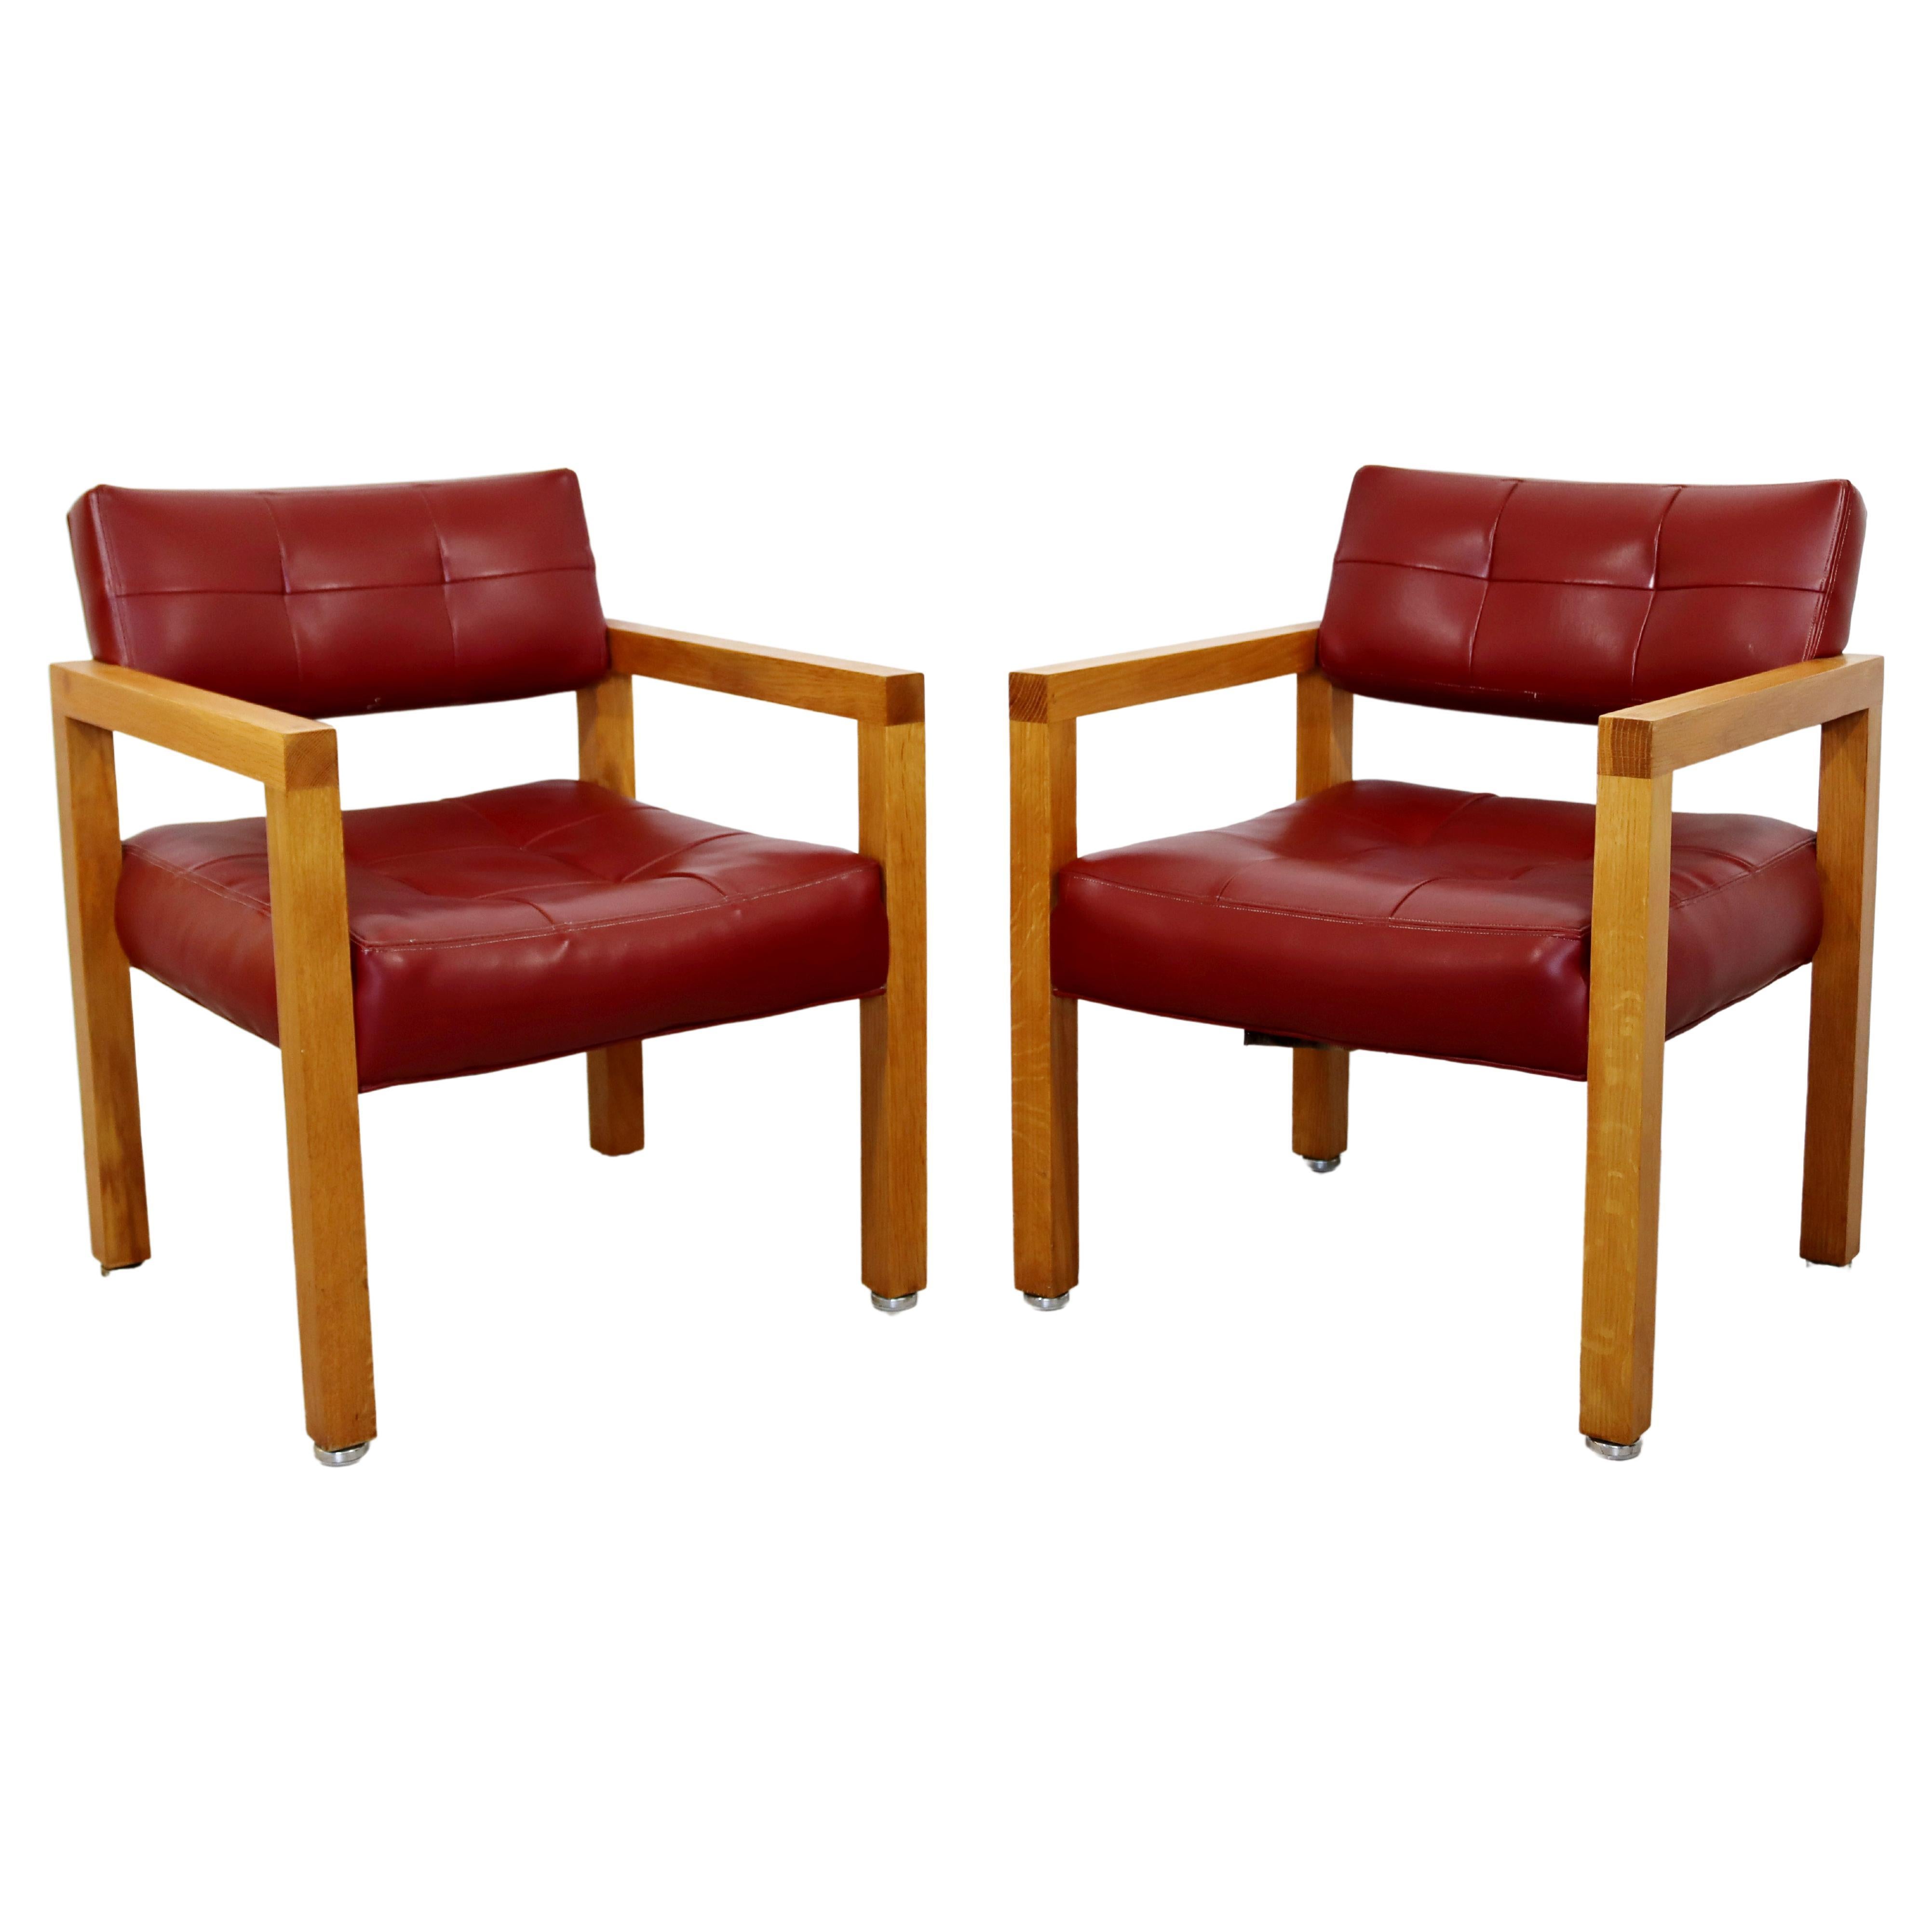 Pair of Leather Mid-Century Modern Milo Baughman for Thayer Coggin Chairs